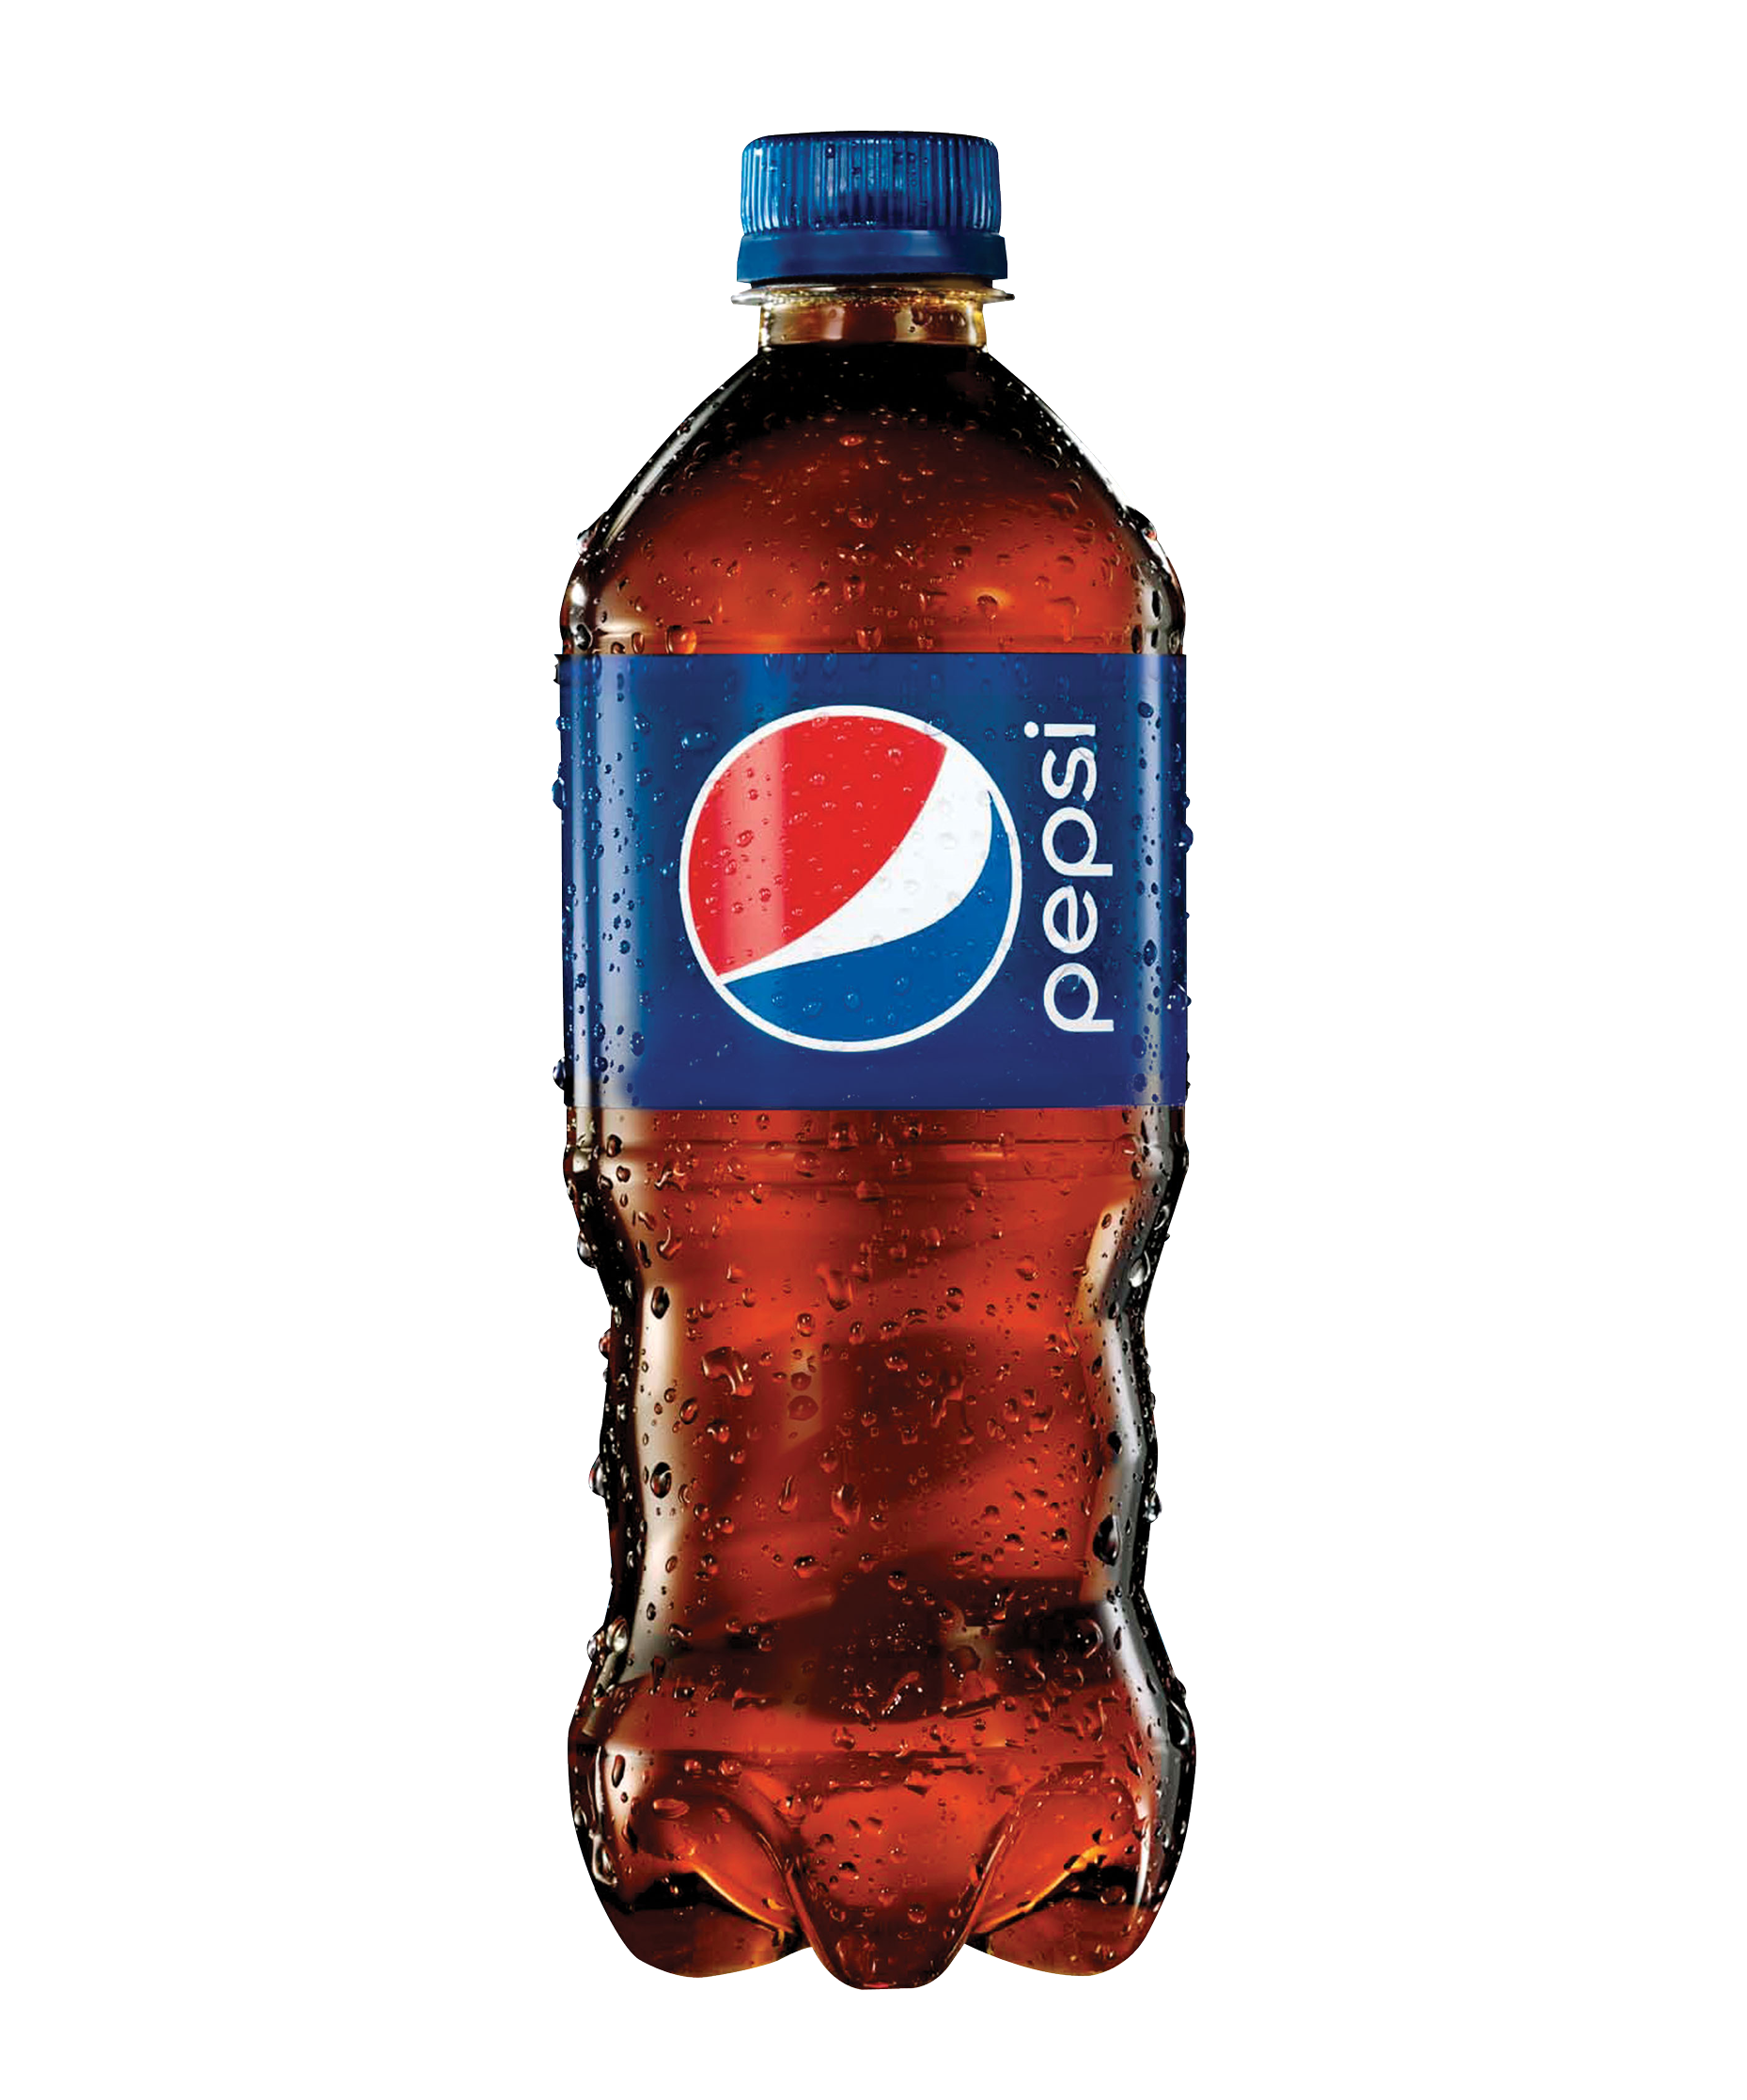 Pepsi PNG Image #42984 - Free Icons and PNG Backgrounds